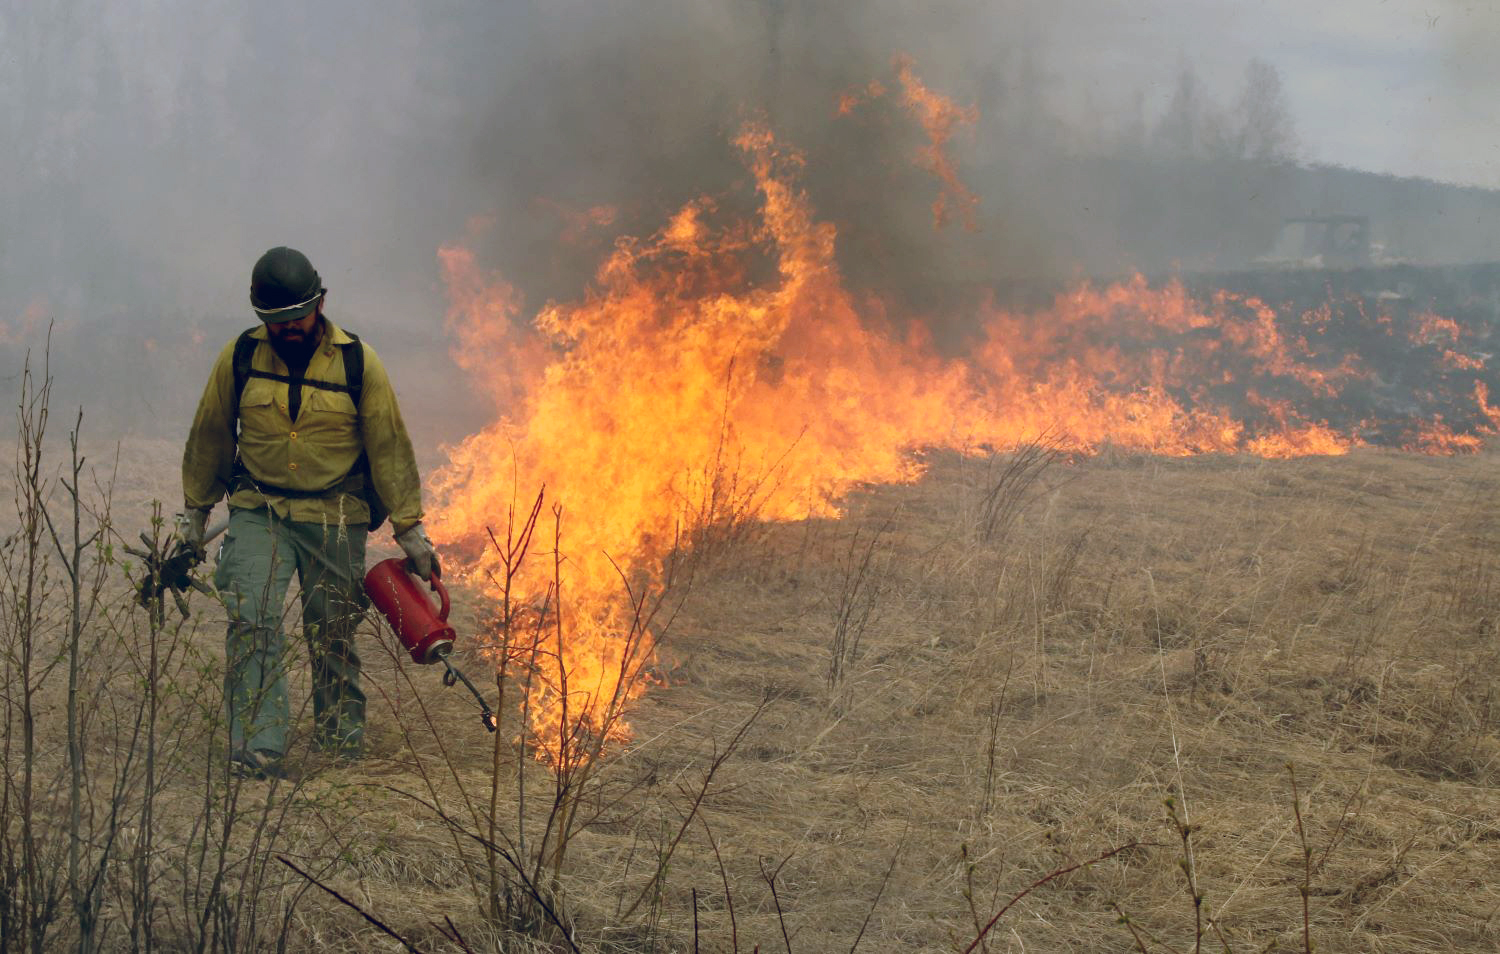 Firefighter looking down while using a drip torch to light dead grass on fire, leaving a wall of flames behind him.